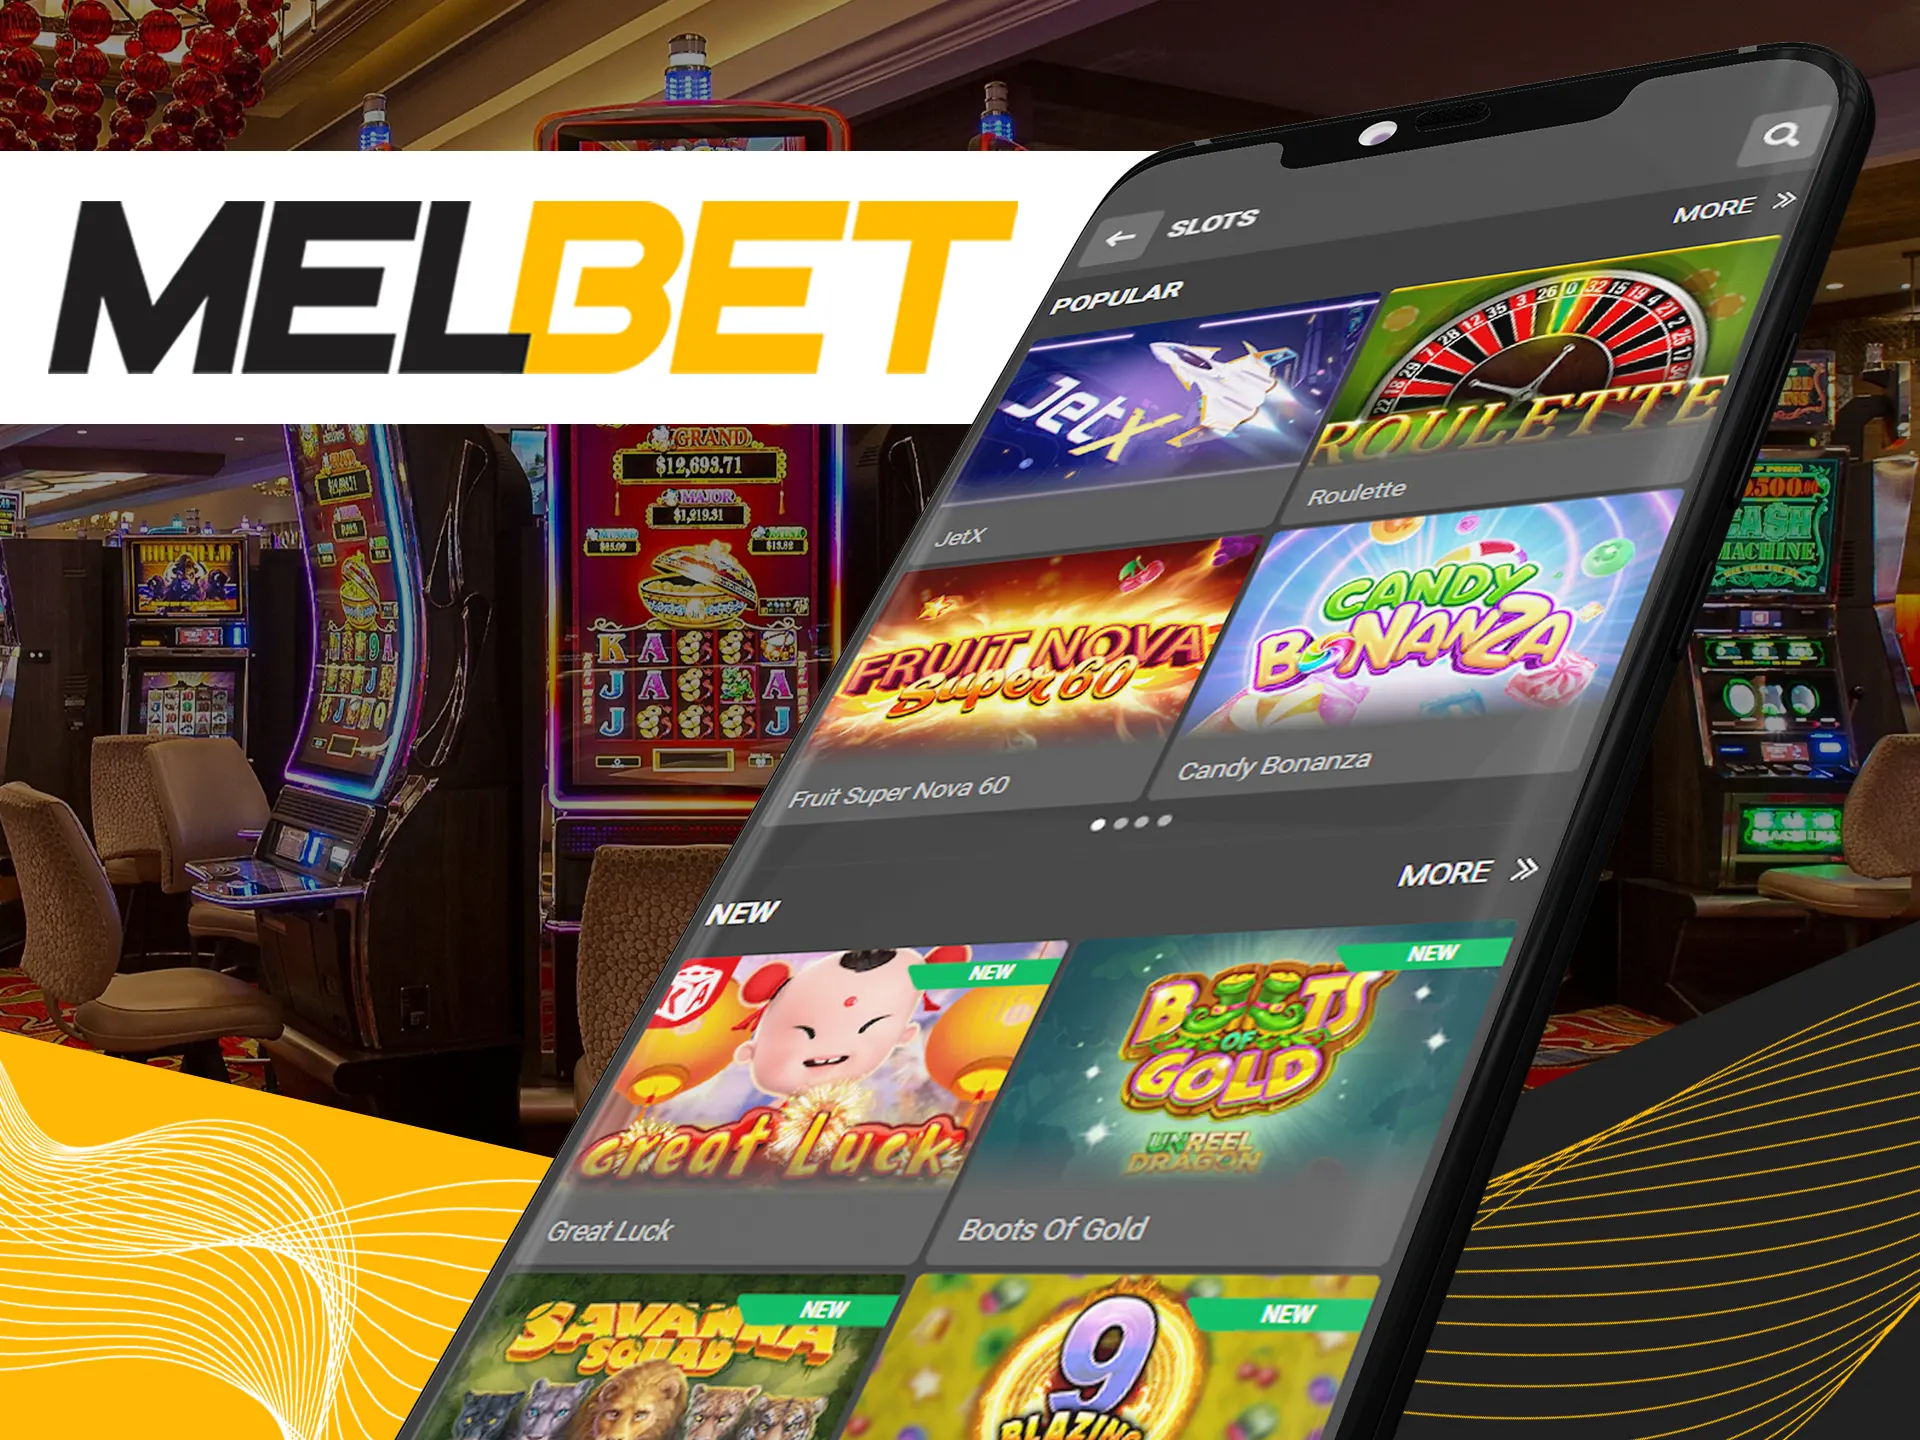 Search for your favourite slots games at Melbet.